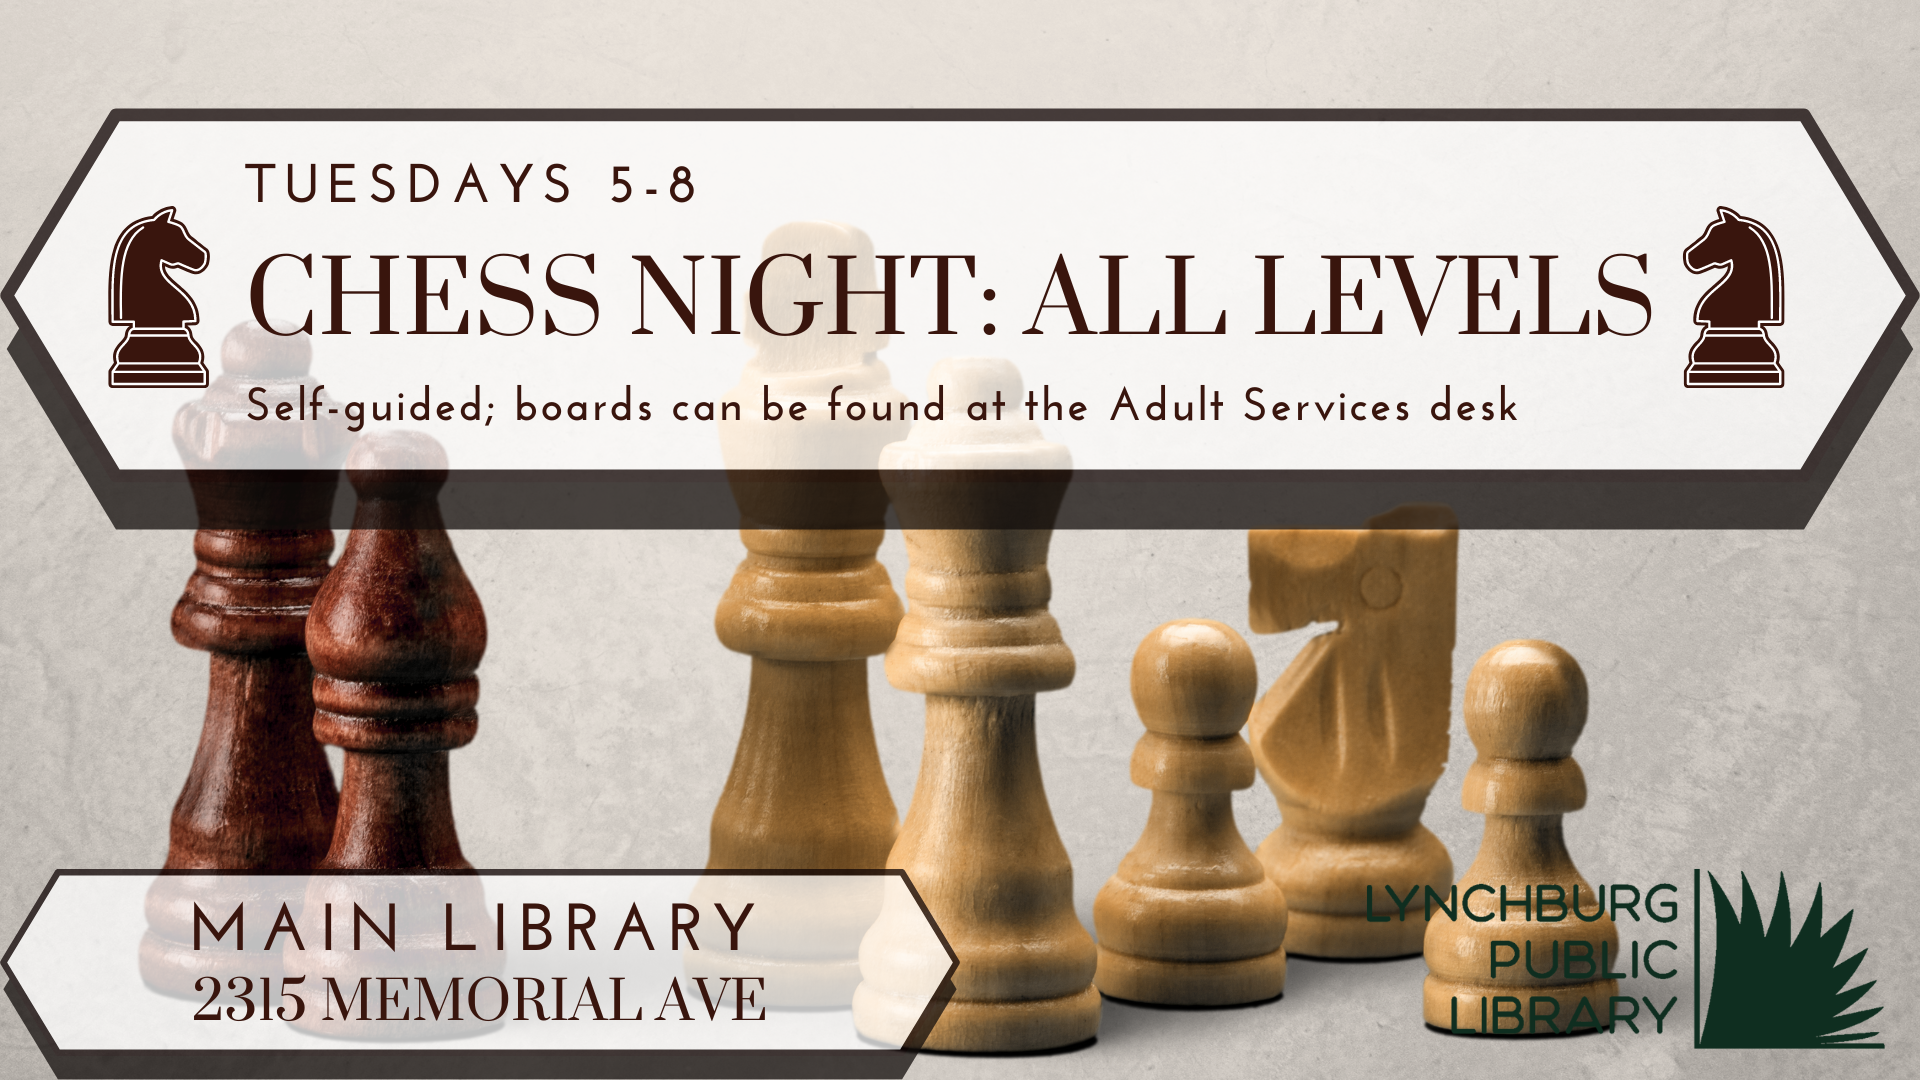 Tuesdays 5-8, Chess Night: All Levels, self-guided, boards can be found at the adult services desk, Main Library, 2315 Memorial Ave